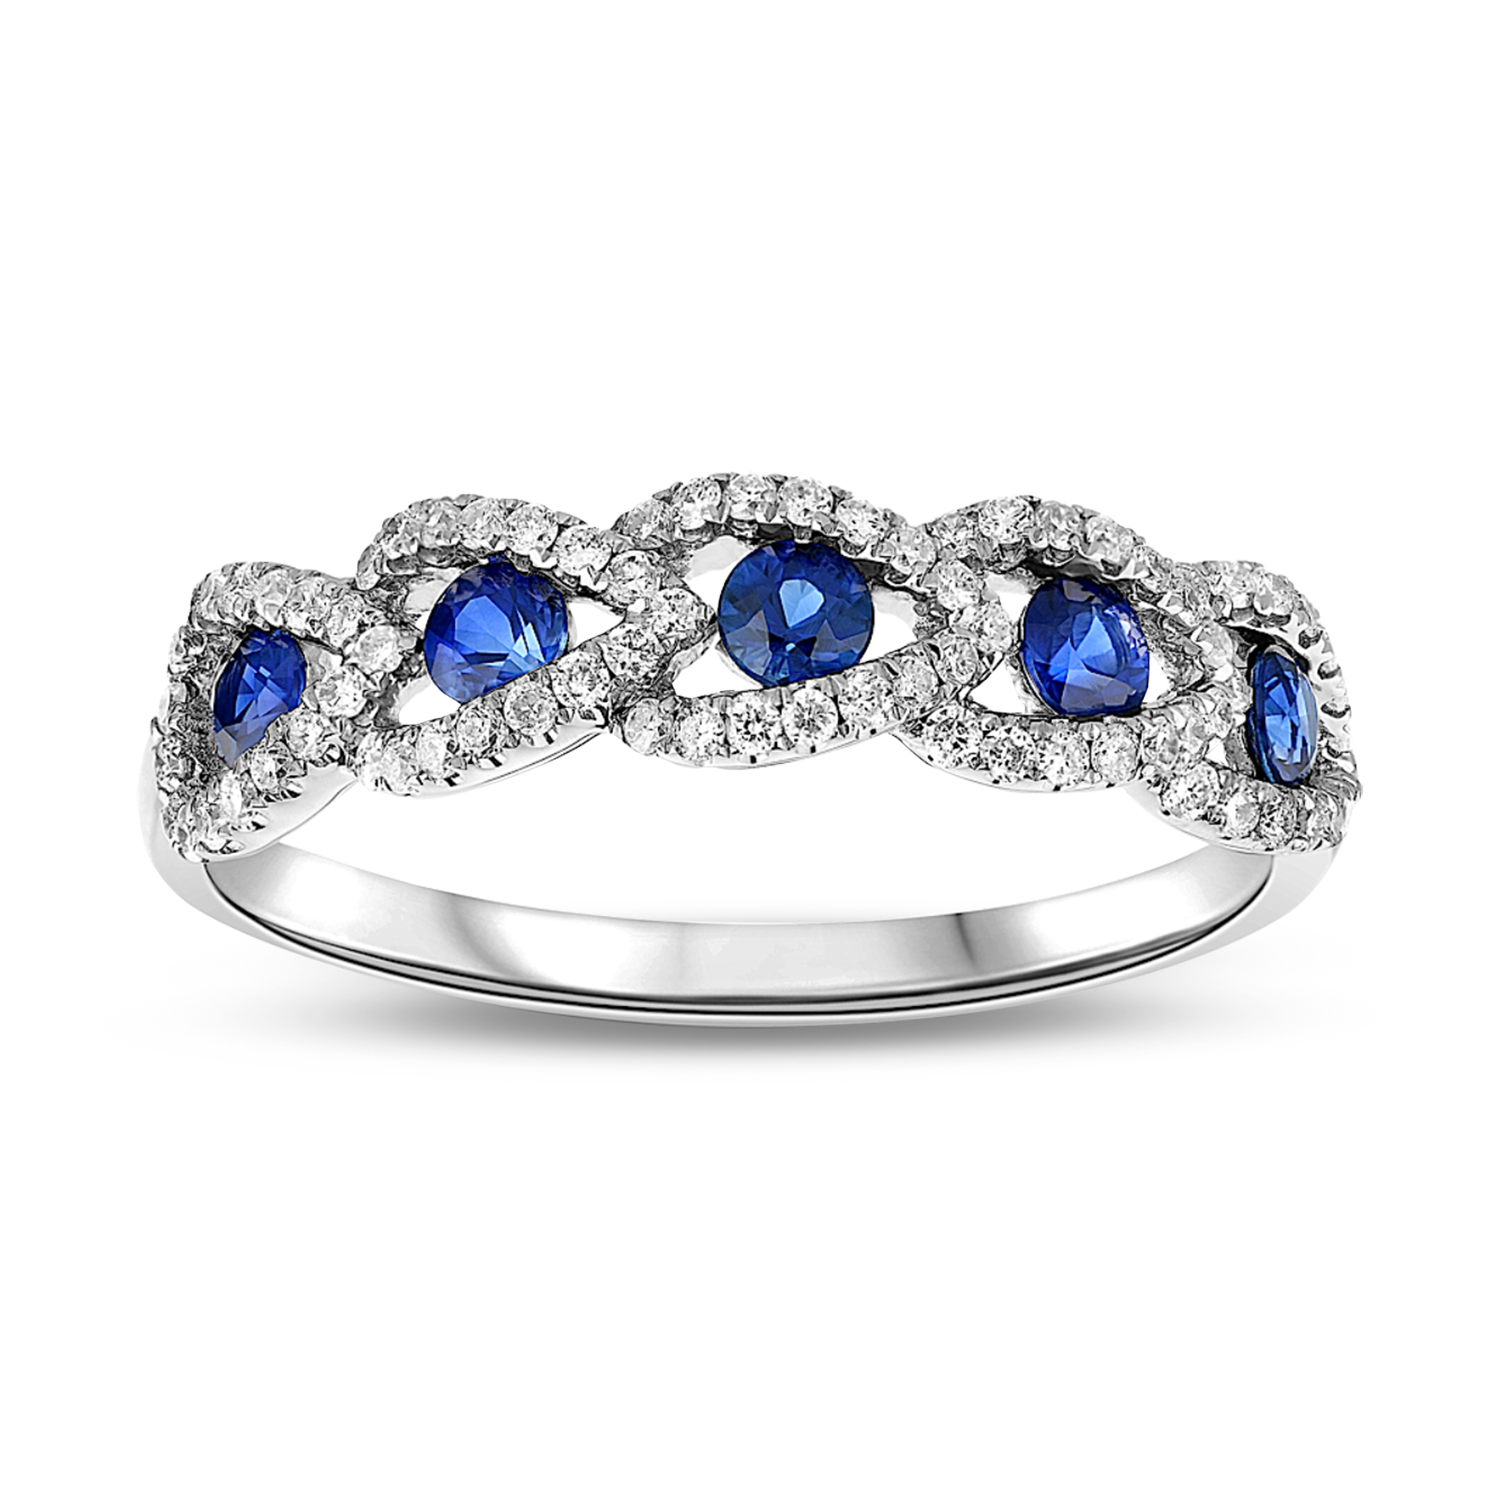 0.70ctw Diamond and Sapphire Wedding Band in 18k Gold